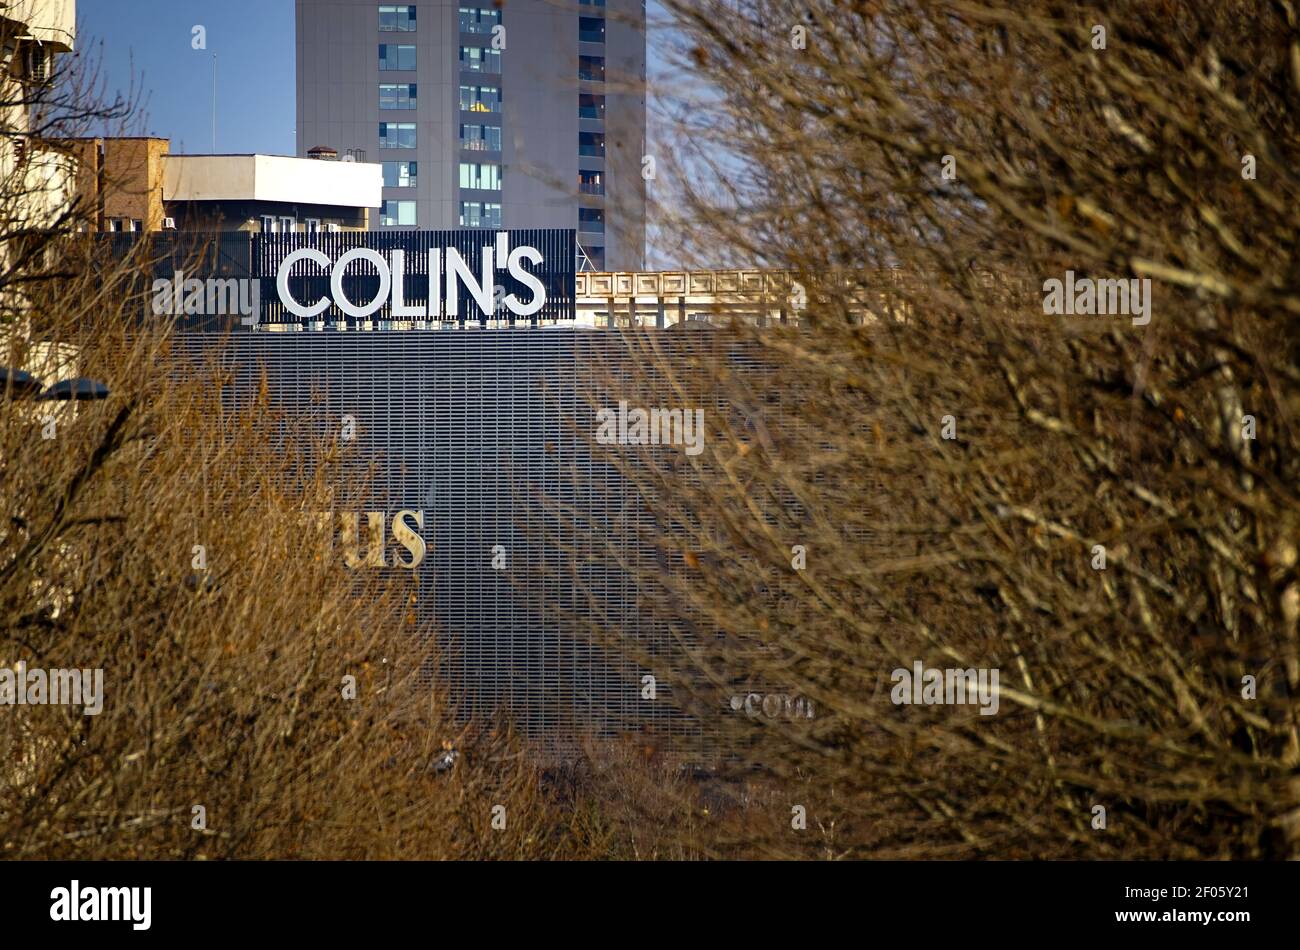 Bucharest, Romania - February 26, 2021: A logo of Colin's Jeans Turkish fashion company is displayed on top of the Unirea Shopping Center building in Stock Photo